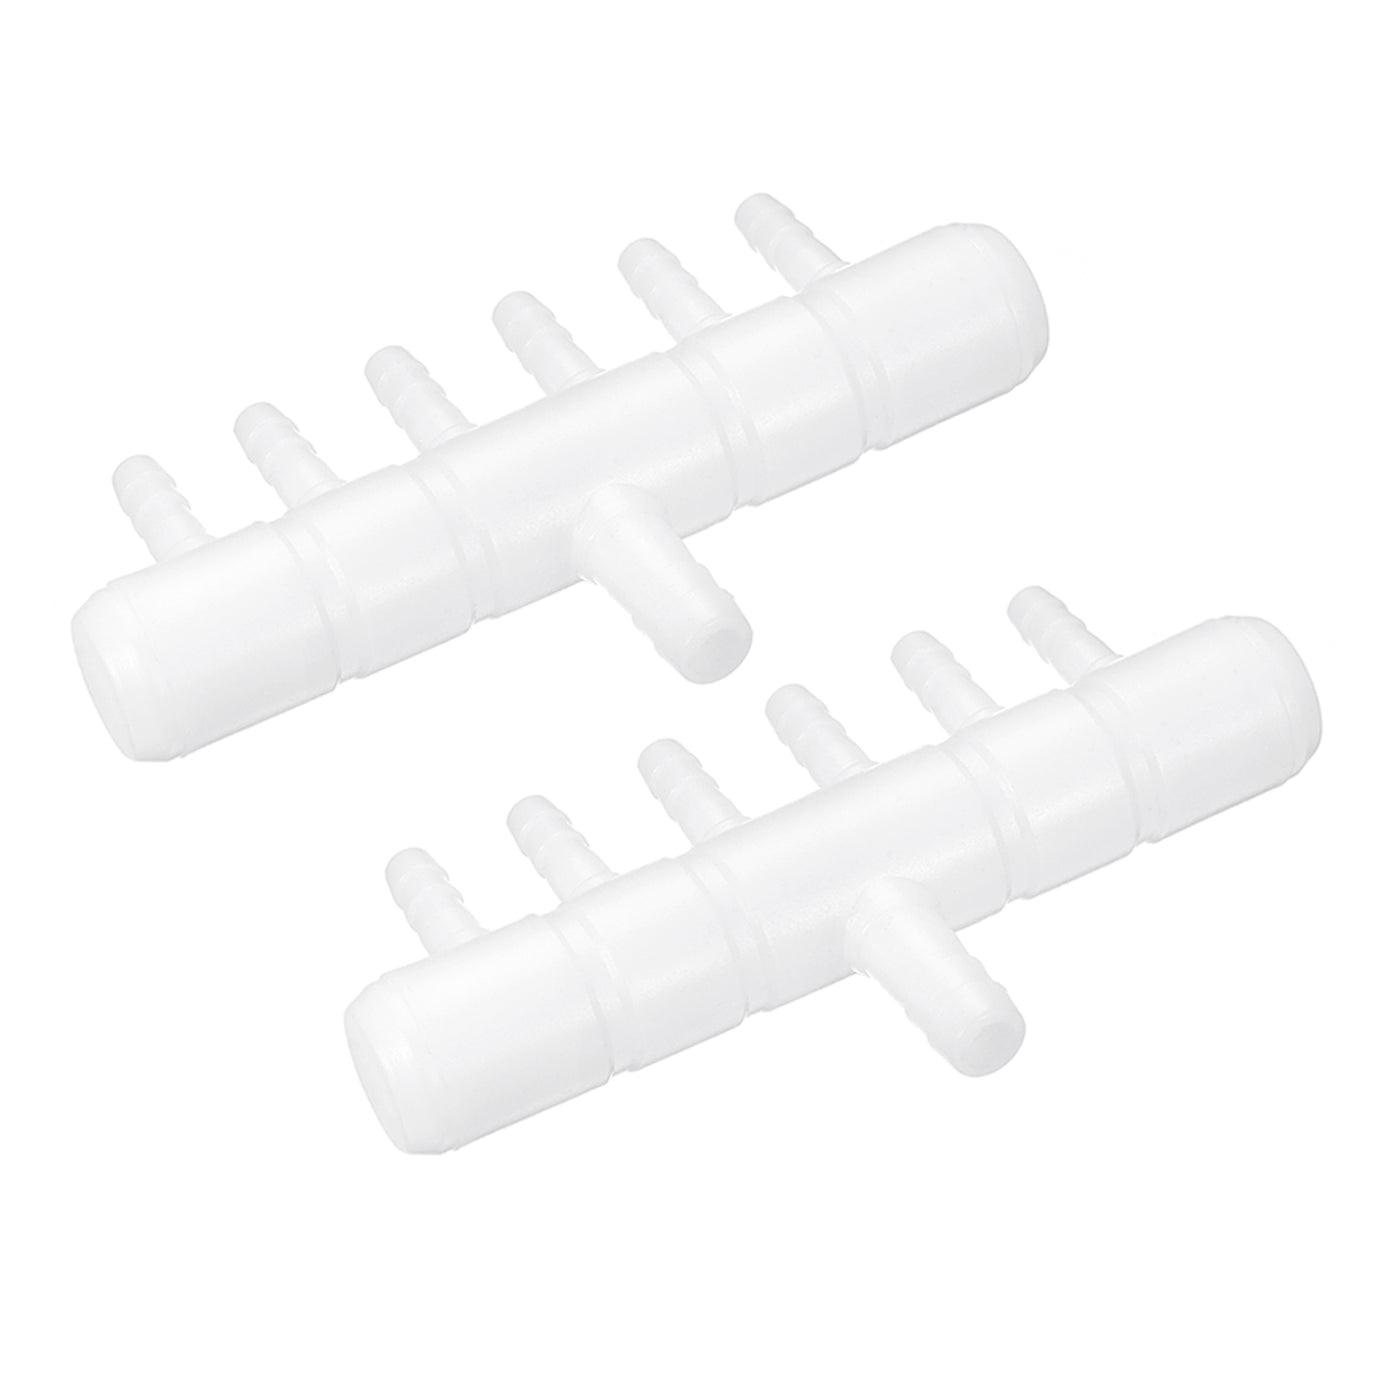 uxcell Uxcell Air Line Tubing Splitter Connector, 2Pcs 8mm/0.31" to 5mm/0.2" 6 Way, White